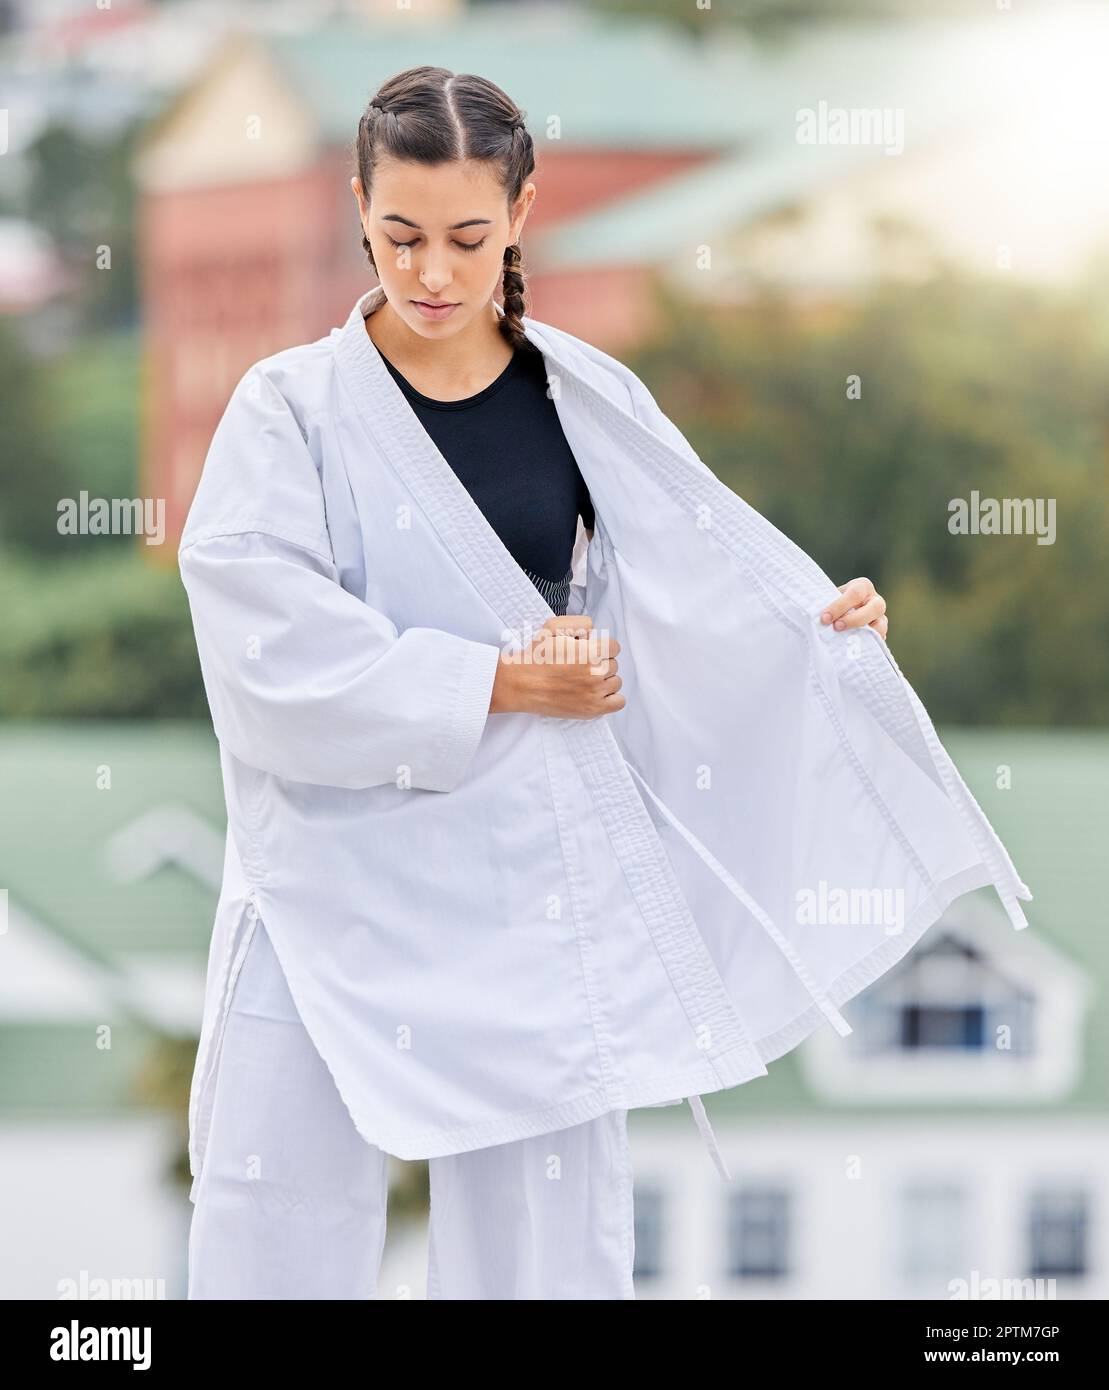 Karate woman, martial arts uniform and fighter ready for a professional competition tournament with focus, honor and discipline. Judo, sports self def Stock Photo